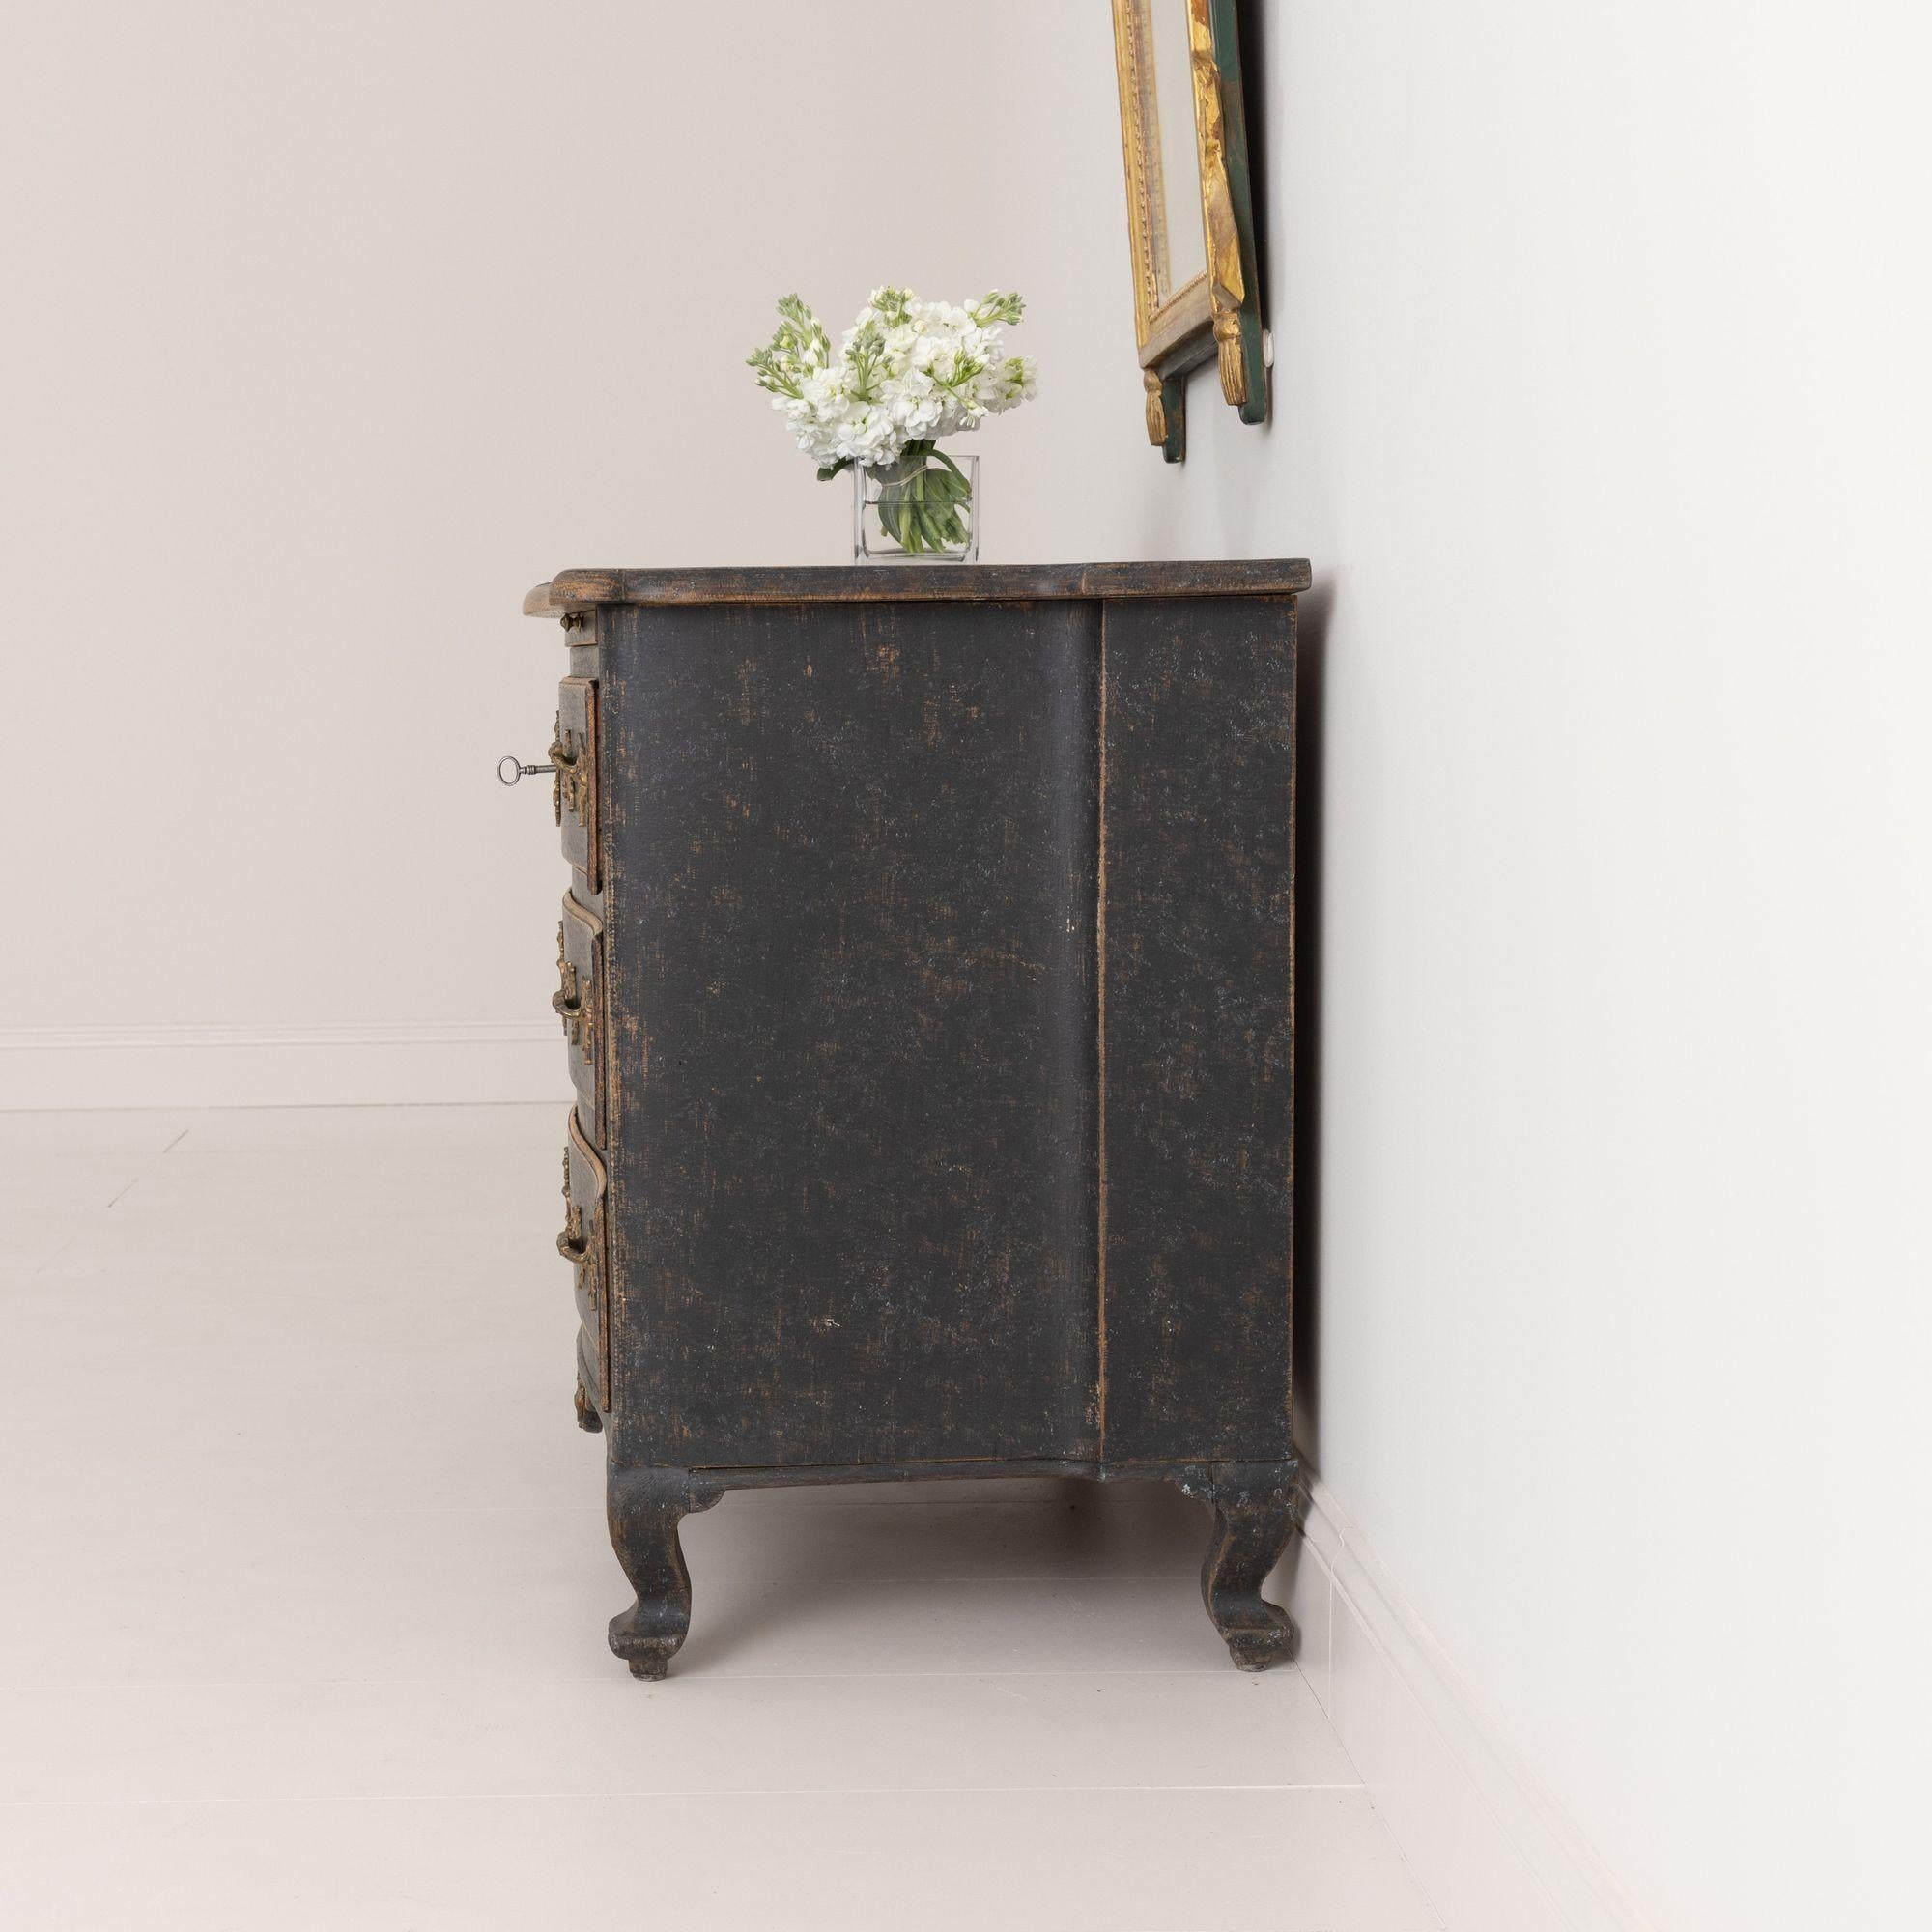 18th C. Swedish Rococo Period Black Painted Commode with Original Brass Hardware For Sale 12